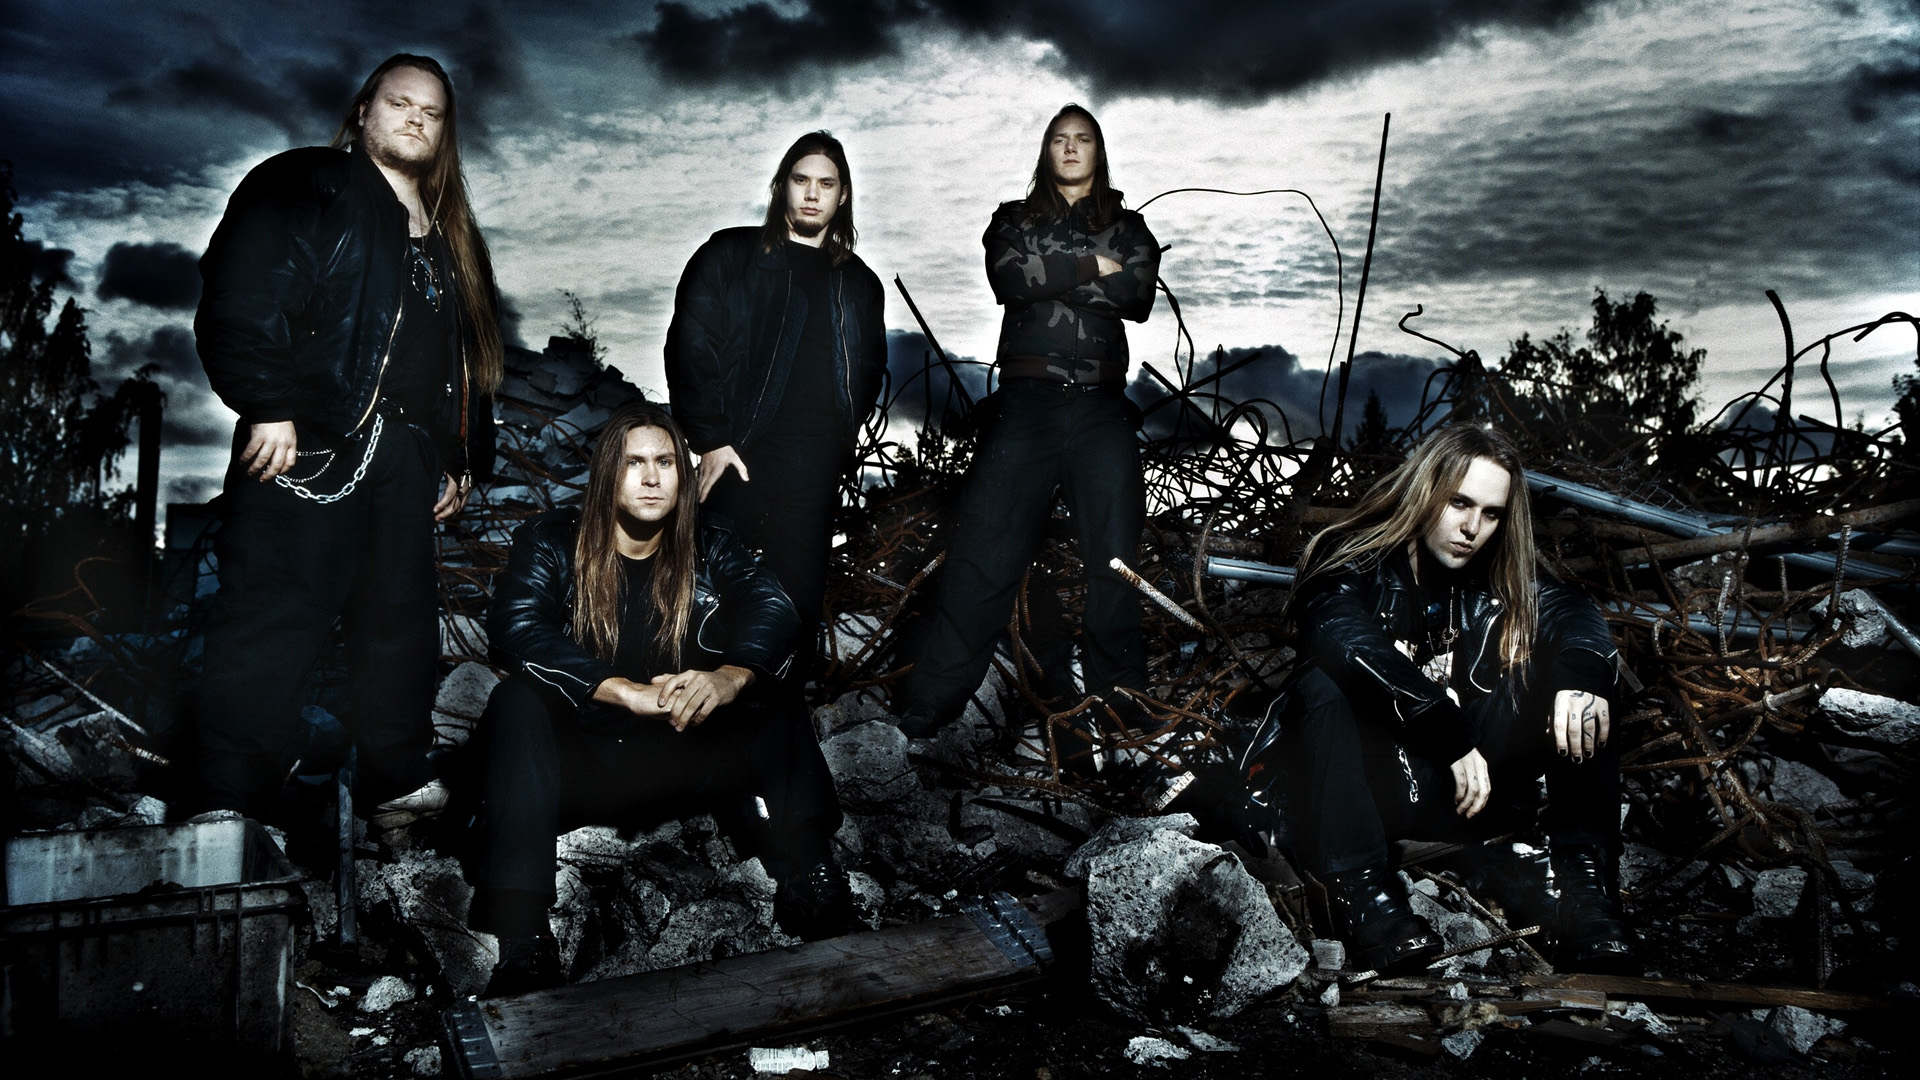 children, Of, Bodom, Band, Groups, Music, Entertainment, Heavy, Metal, Death, Hard, Rock, Album, Covers Wallpaper